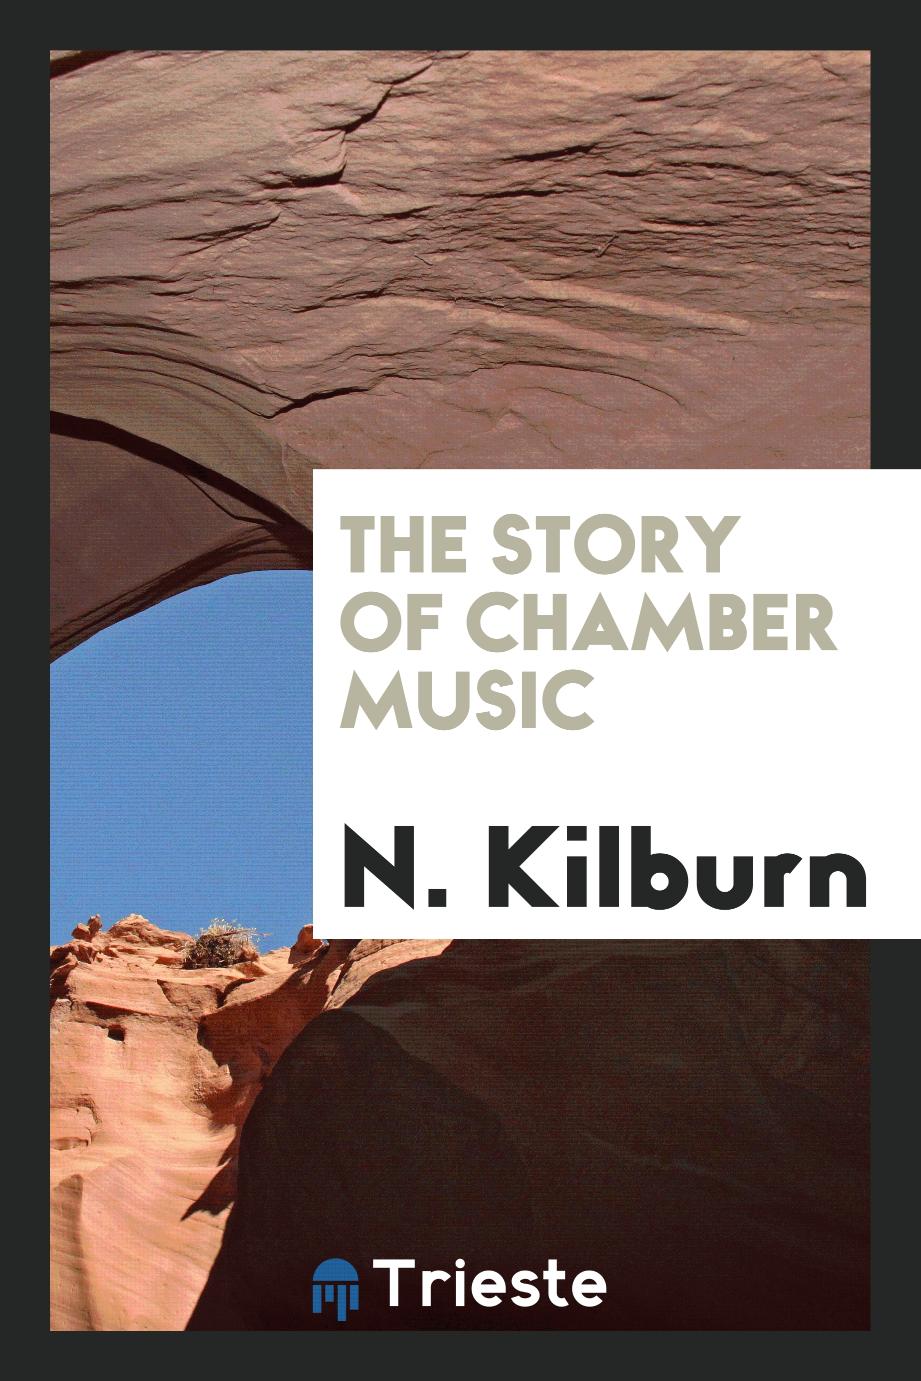 The story of chamber music